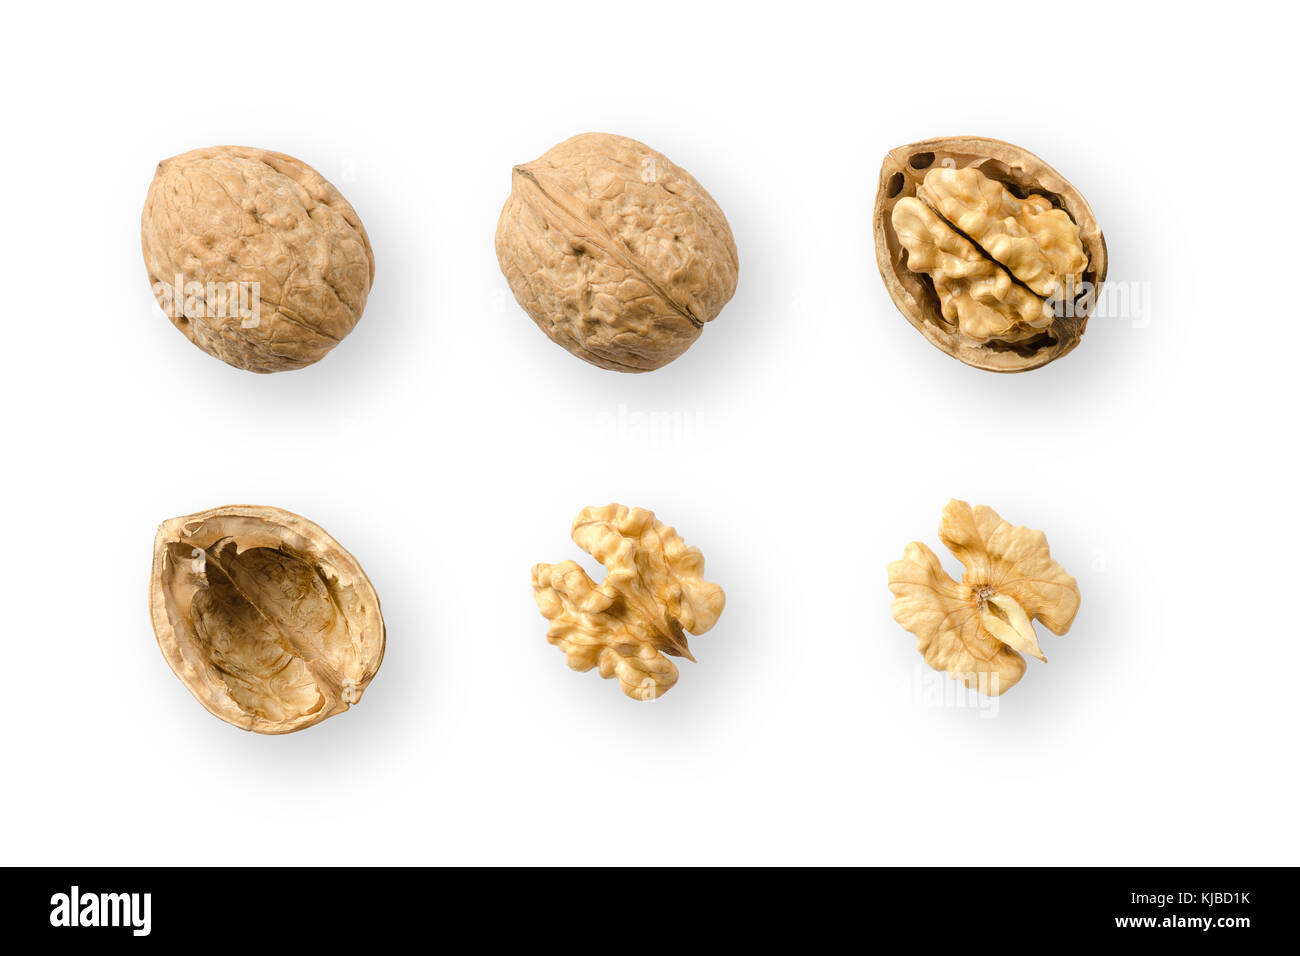 Walnuts, whole and opened, on white background. Top views of nuts and kernel halves. Seeds of the common walnut tree Juglans regia. Stock Photo